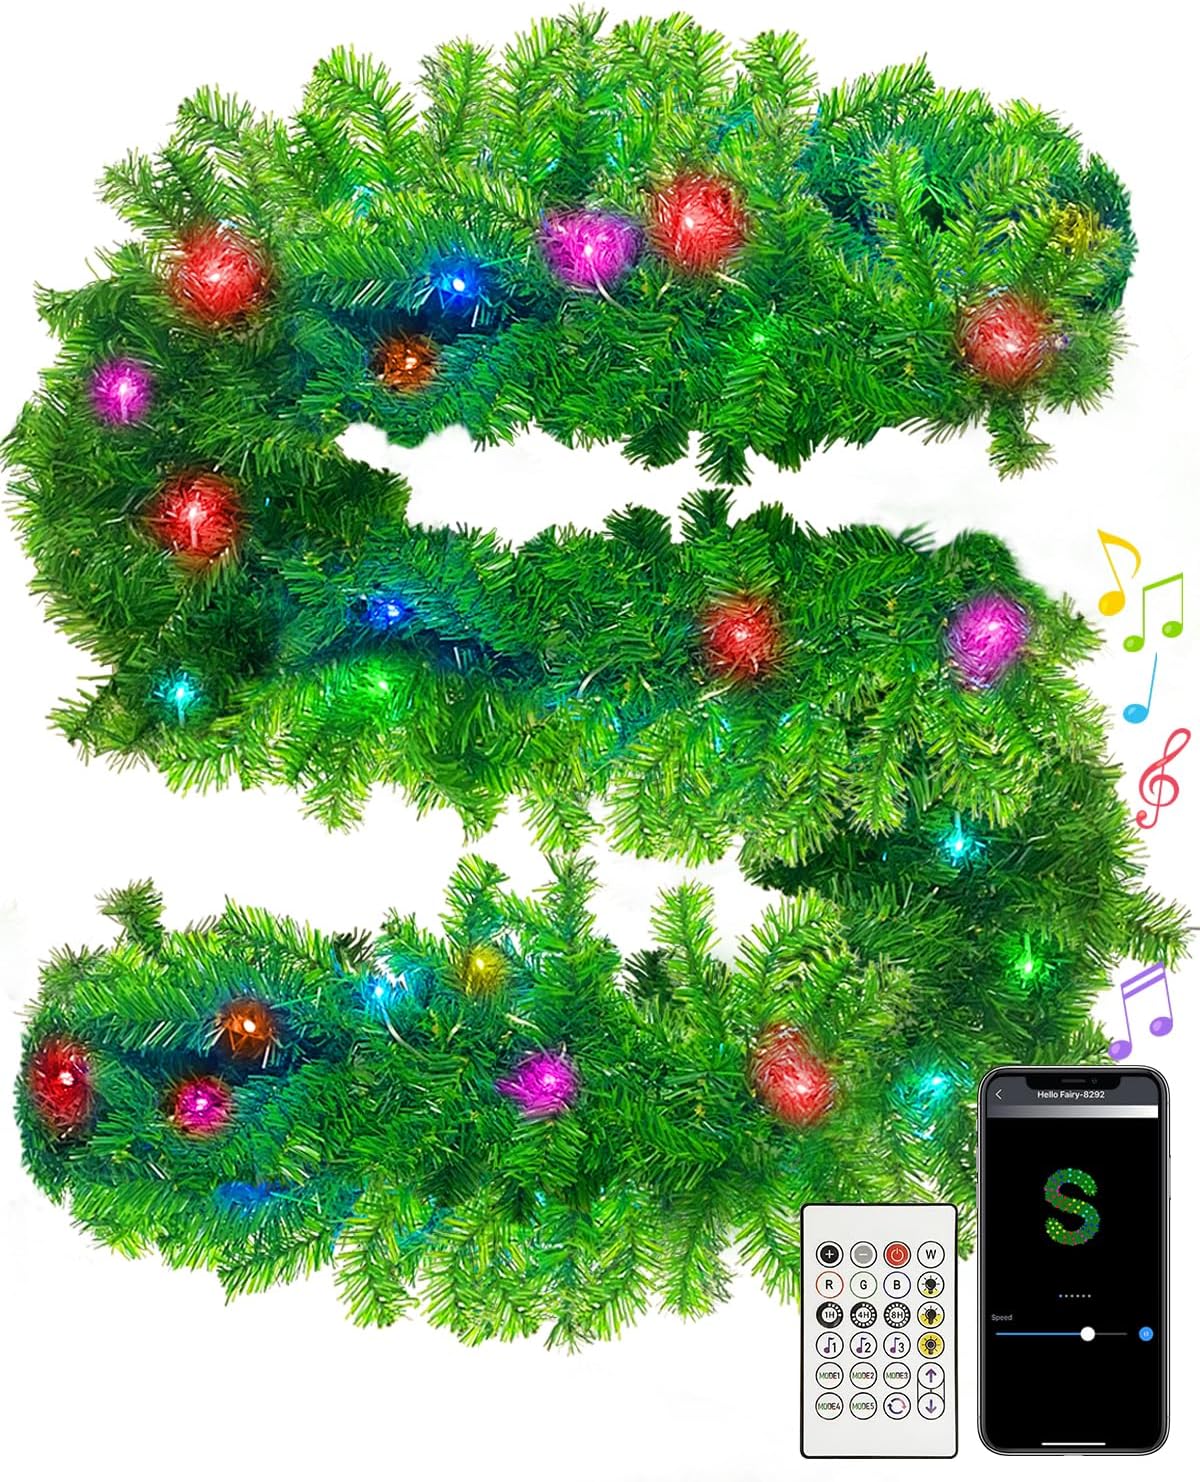 Christmas Garland With Changing LED Lights, Remote, Timer, Dimmer 